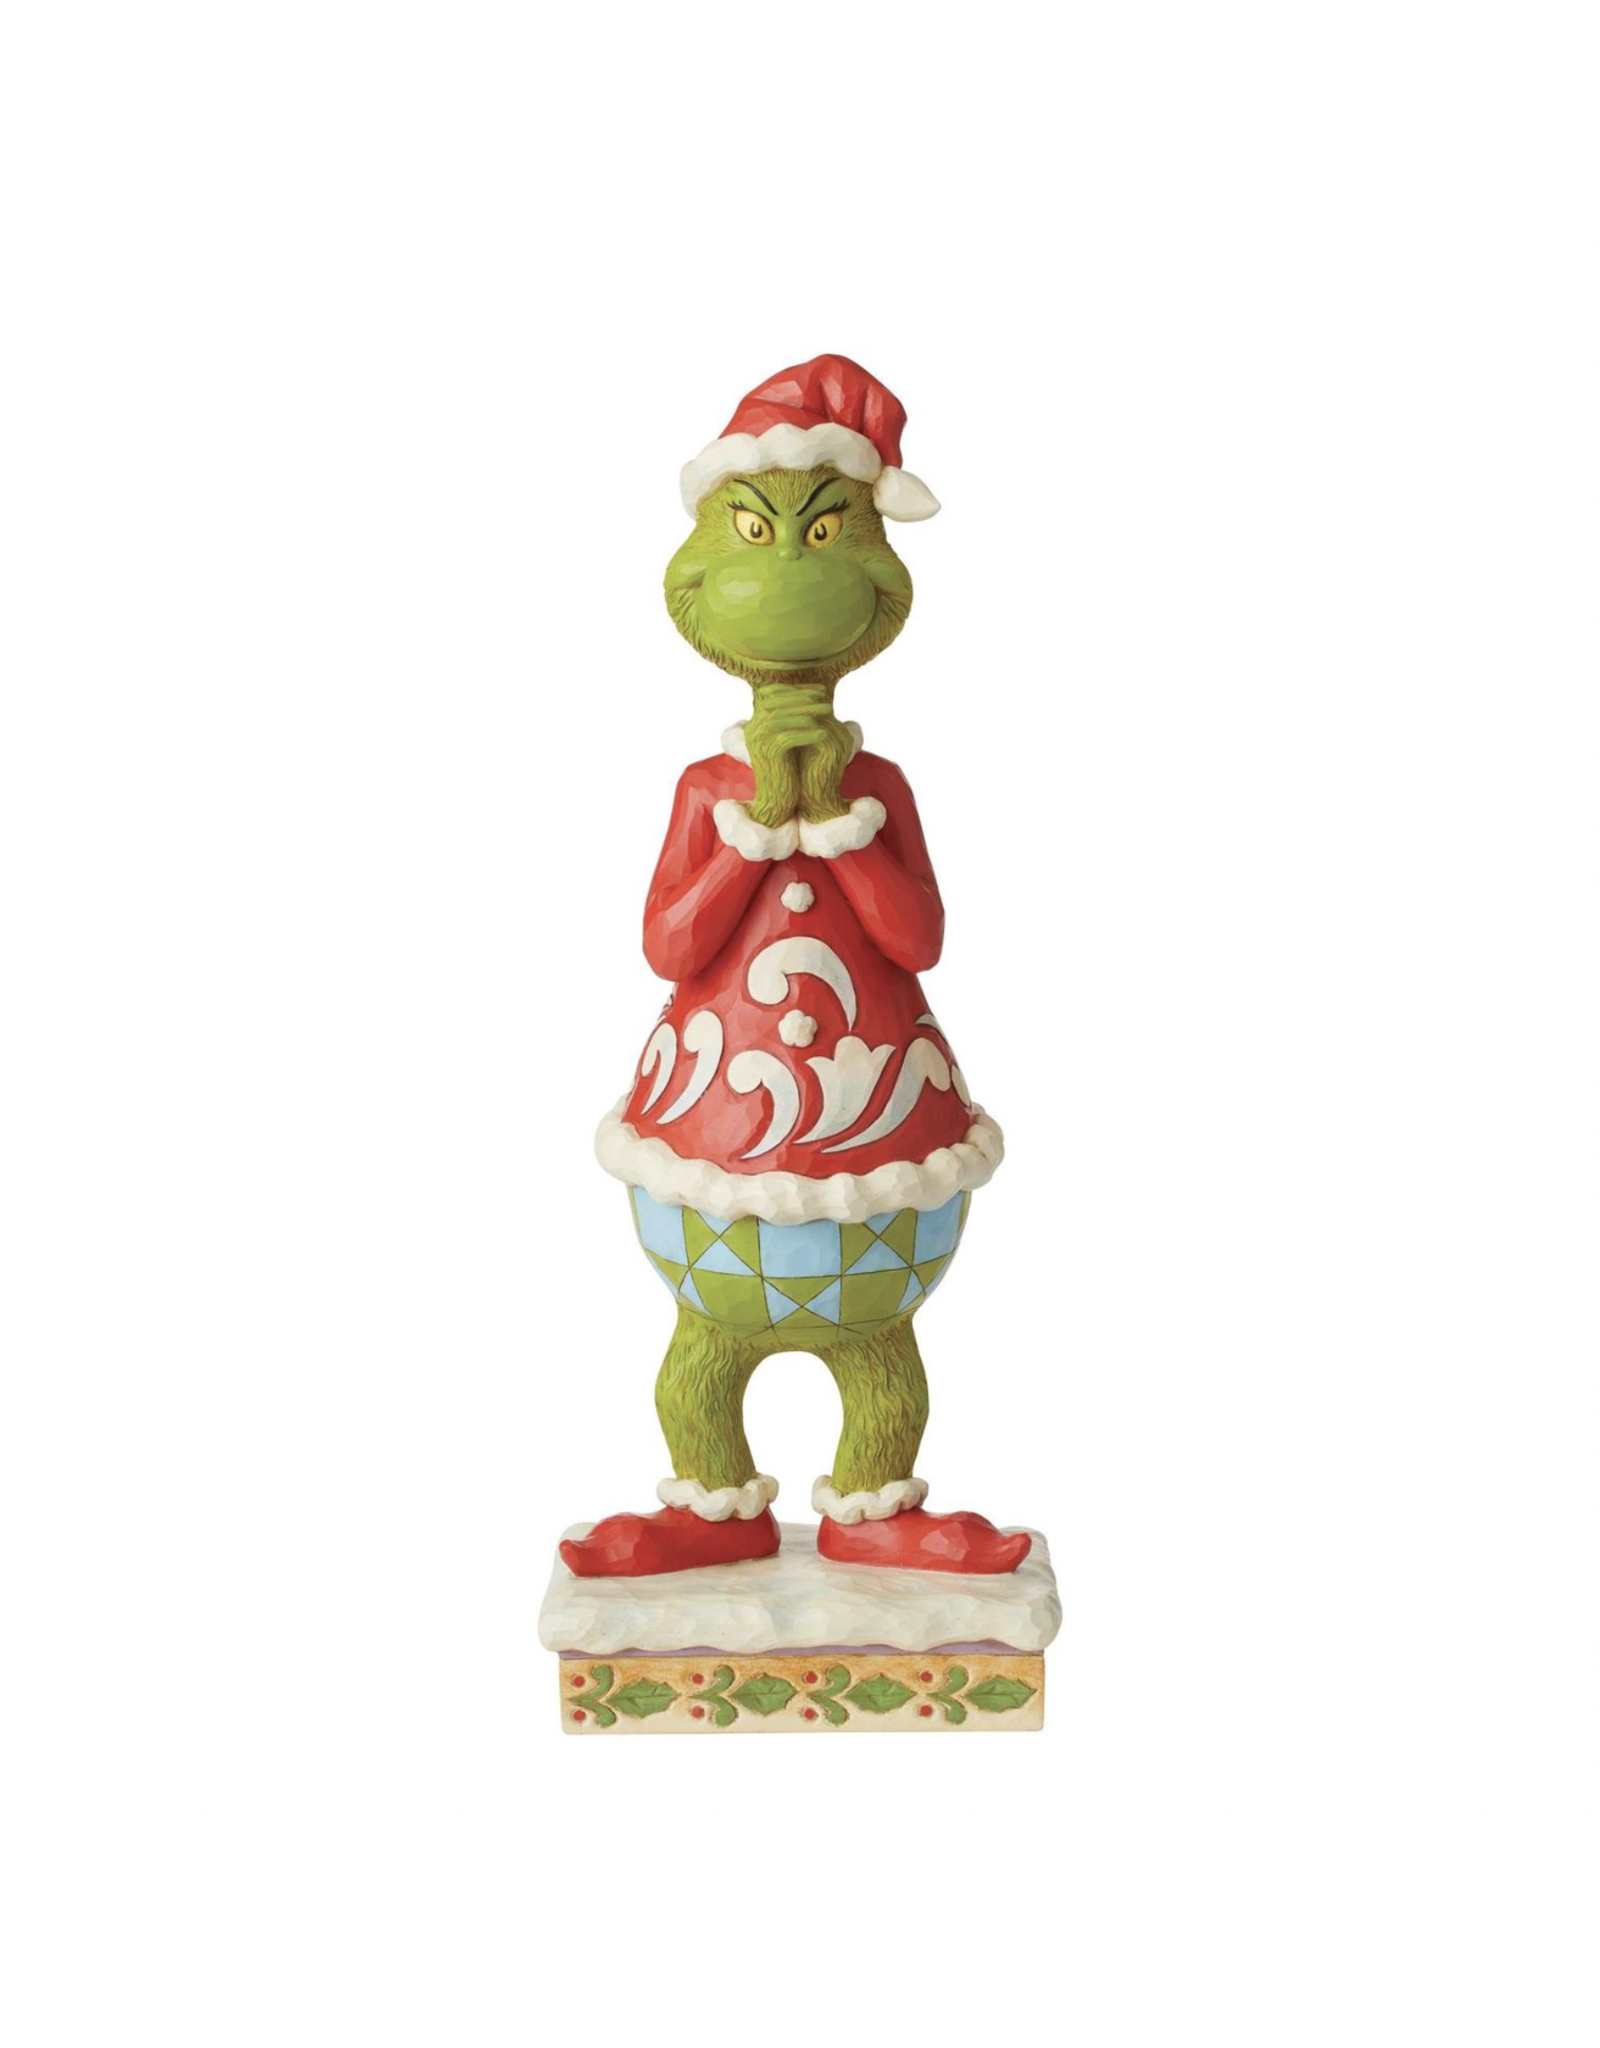 Jim Shore Grinch w/Hands Clenched Deluxe Statue